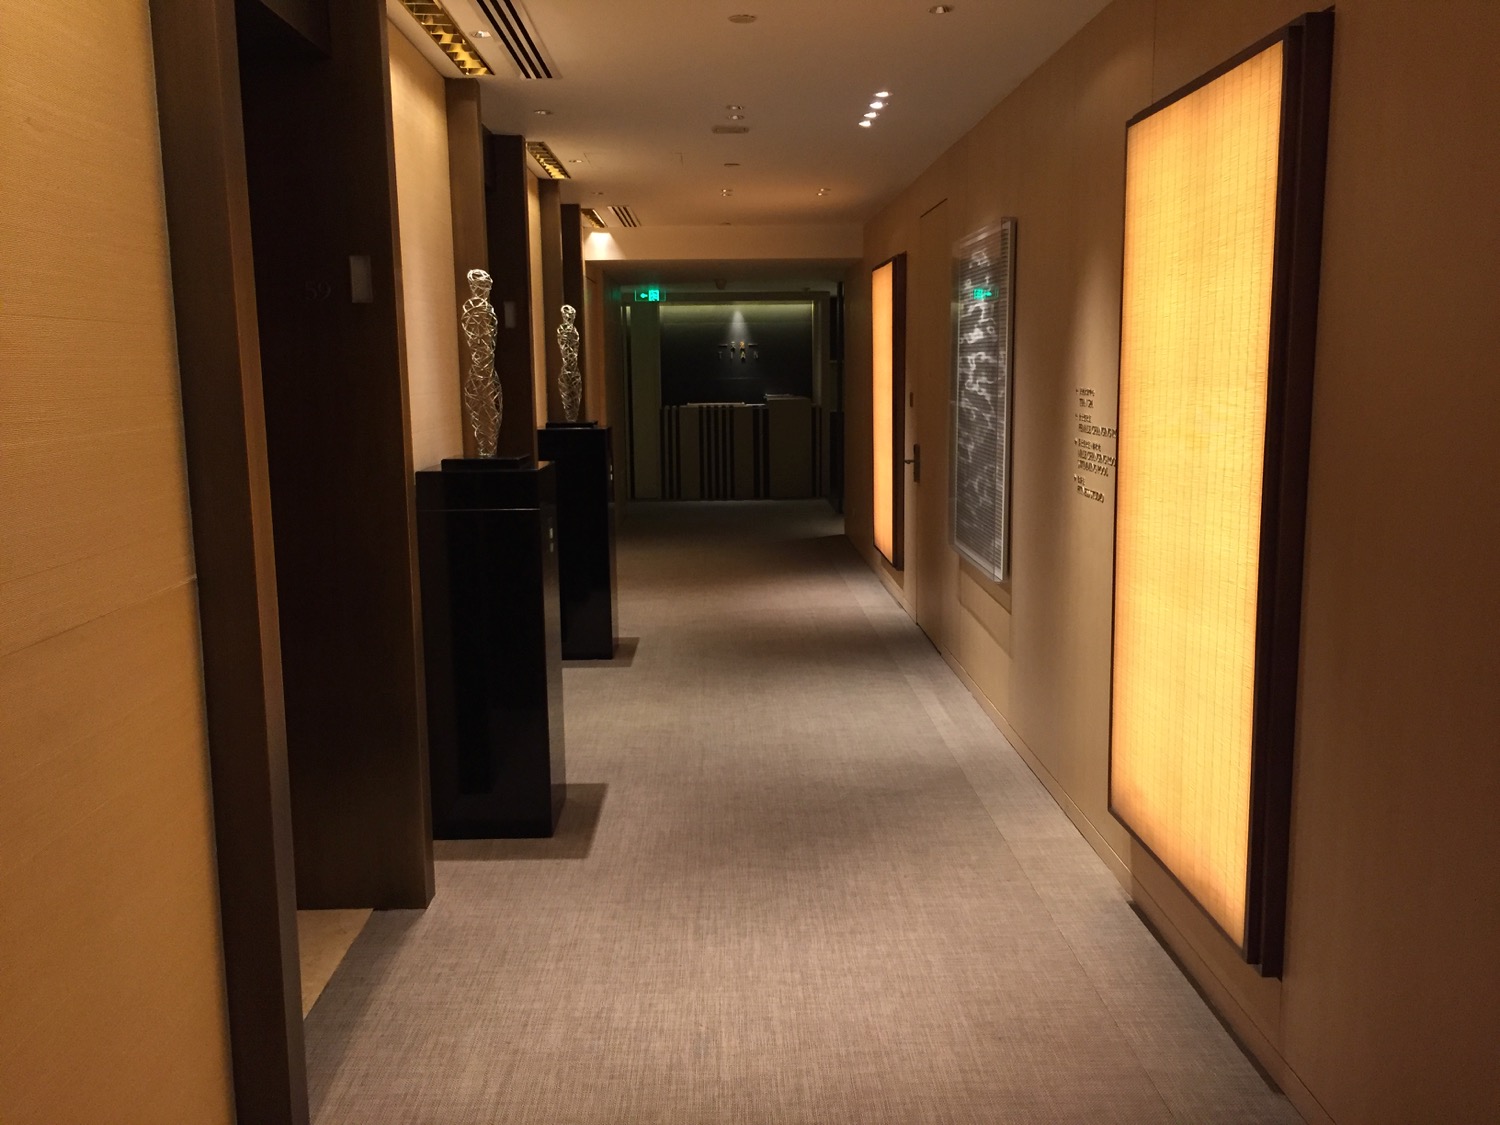 a hallway with a few sculptures on the walls